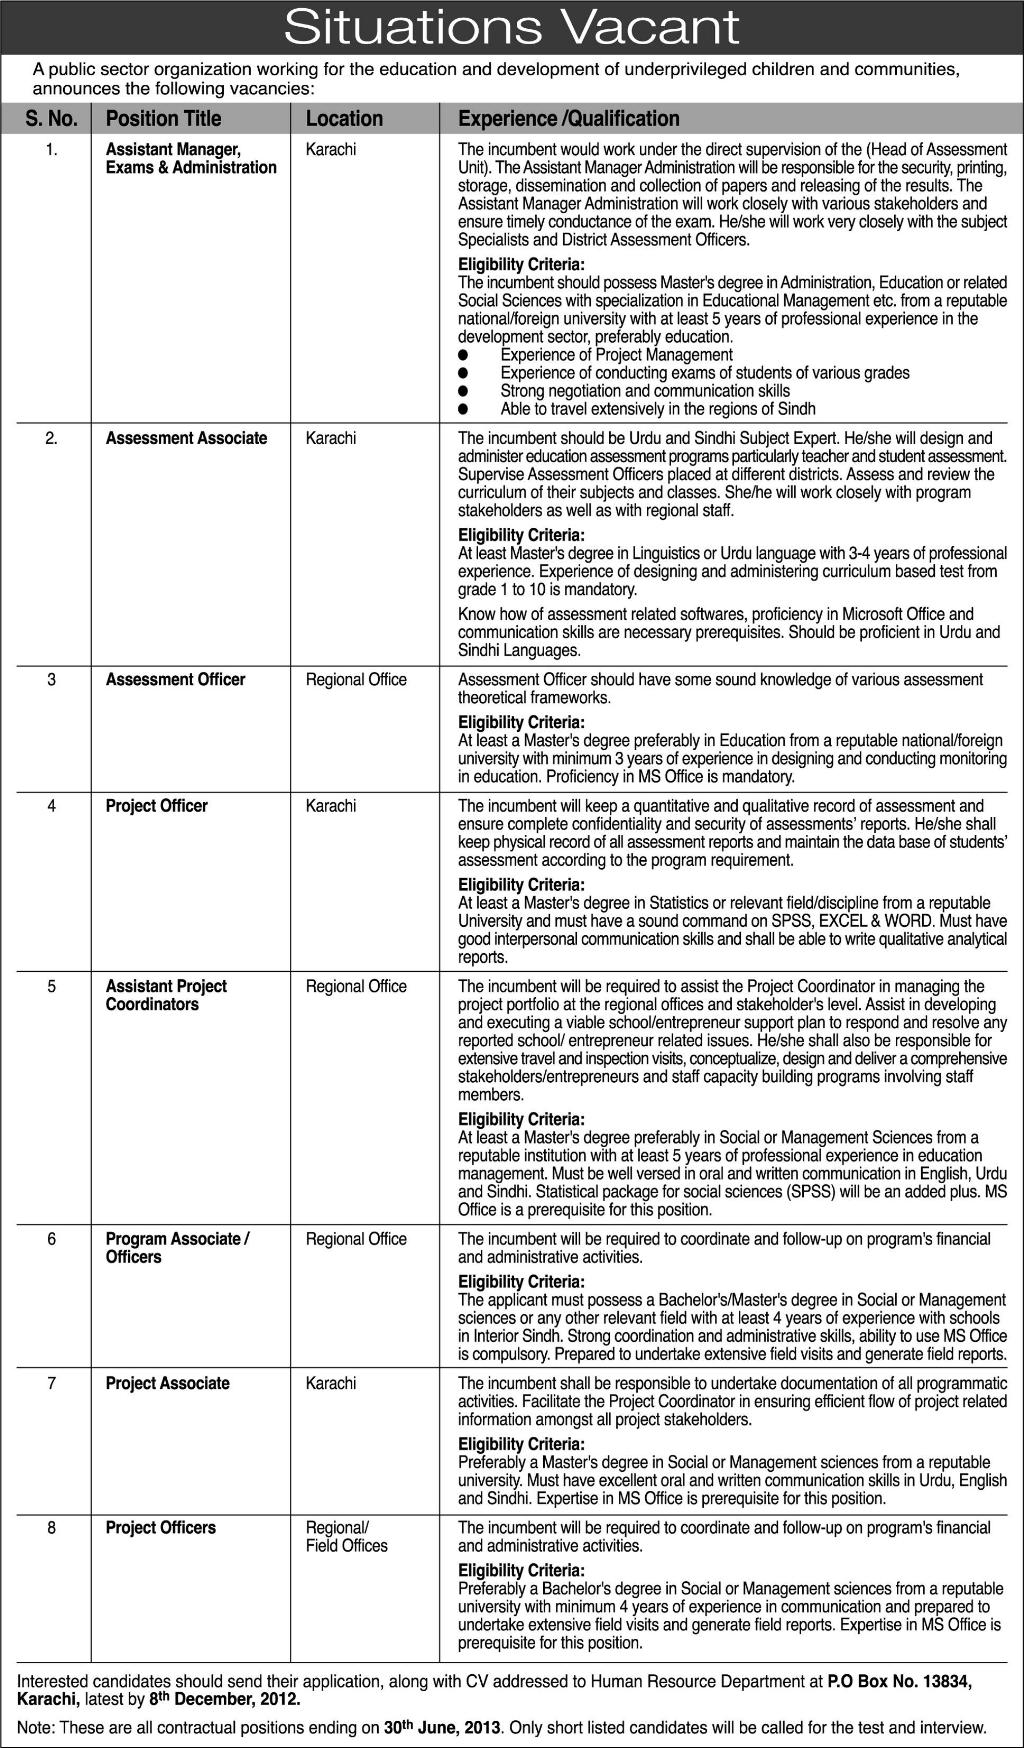 PO Box 13834 Karachi Jobs in a Public Sector Organization for Managers Officers & Staff